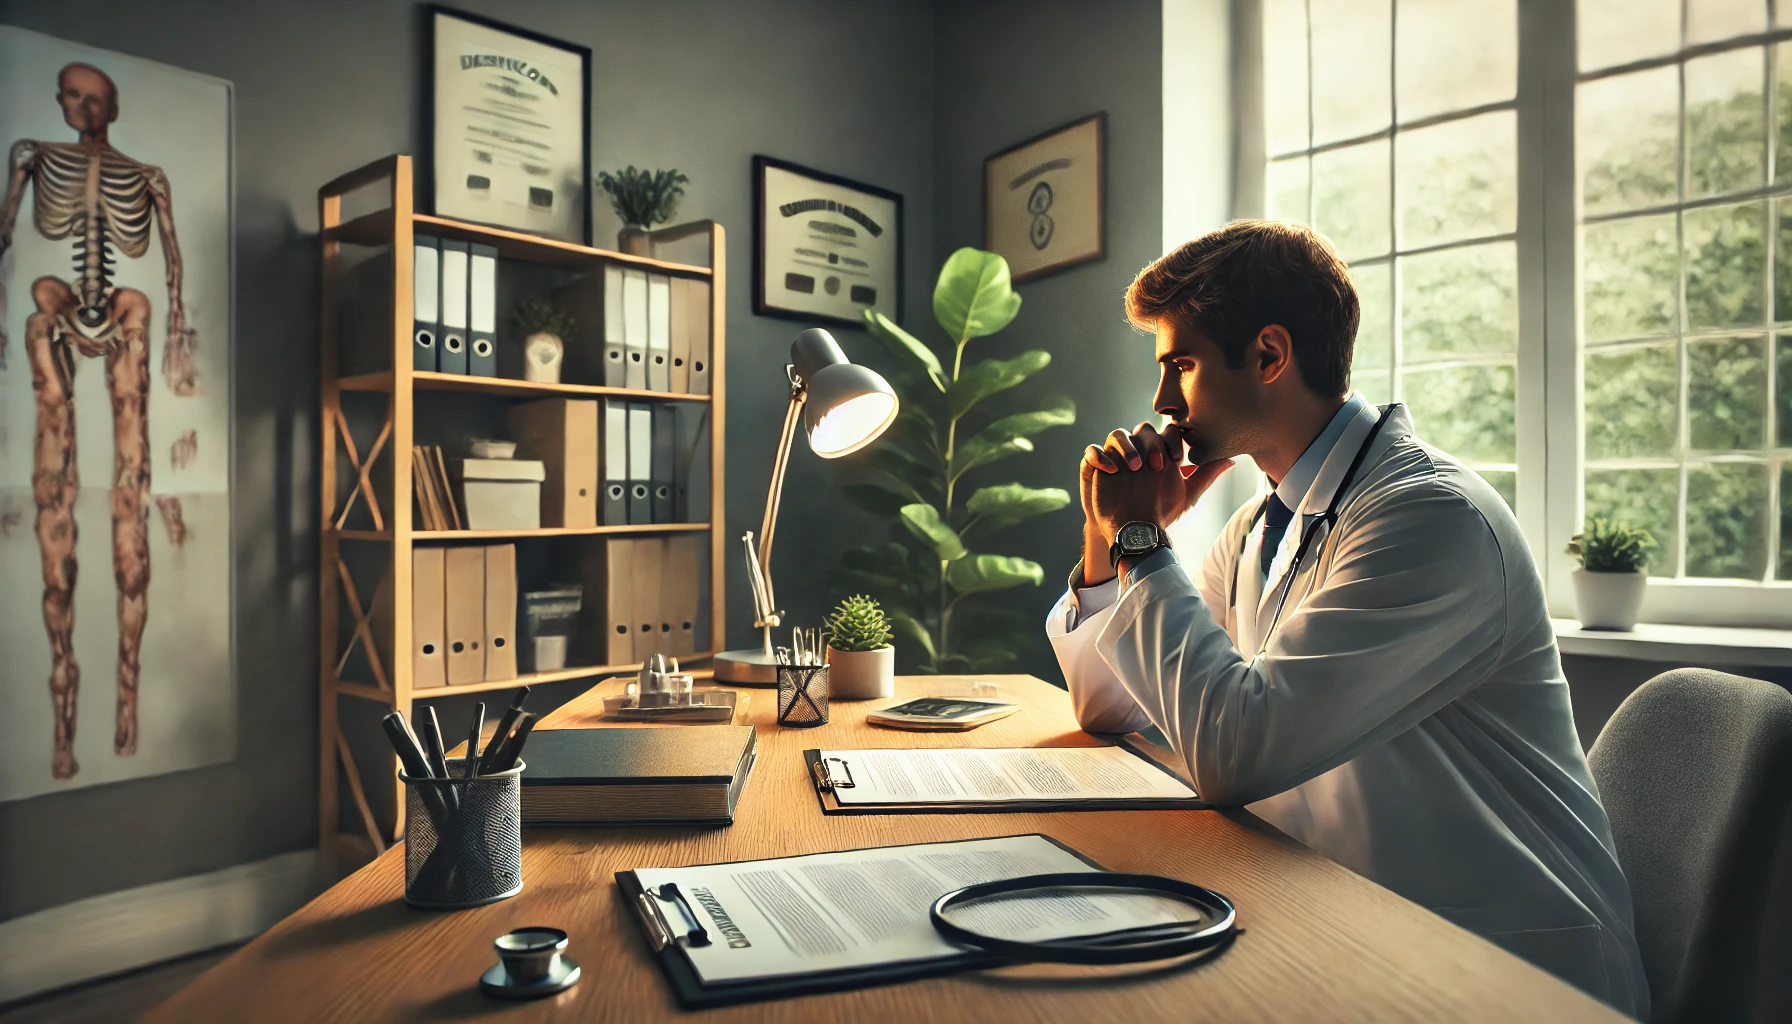 A wide-angle image depicting a physician in a contemplative pose, sitting at a desk in a calm, softly lit office. The physician is holding a clipboard